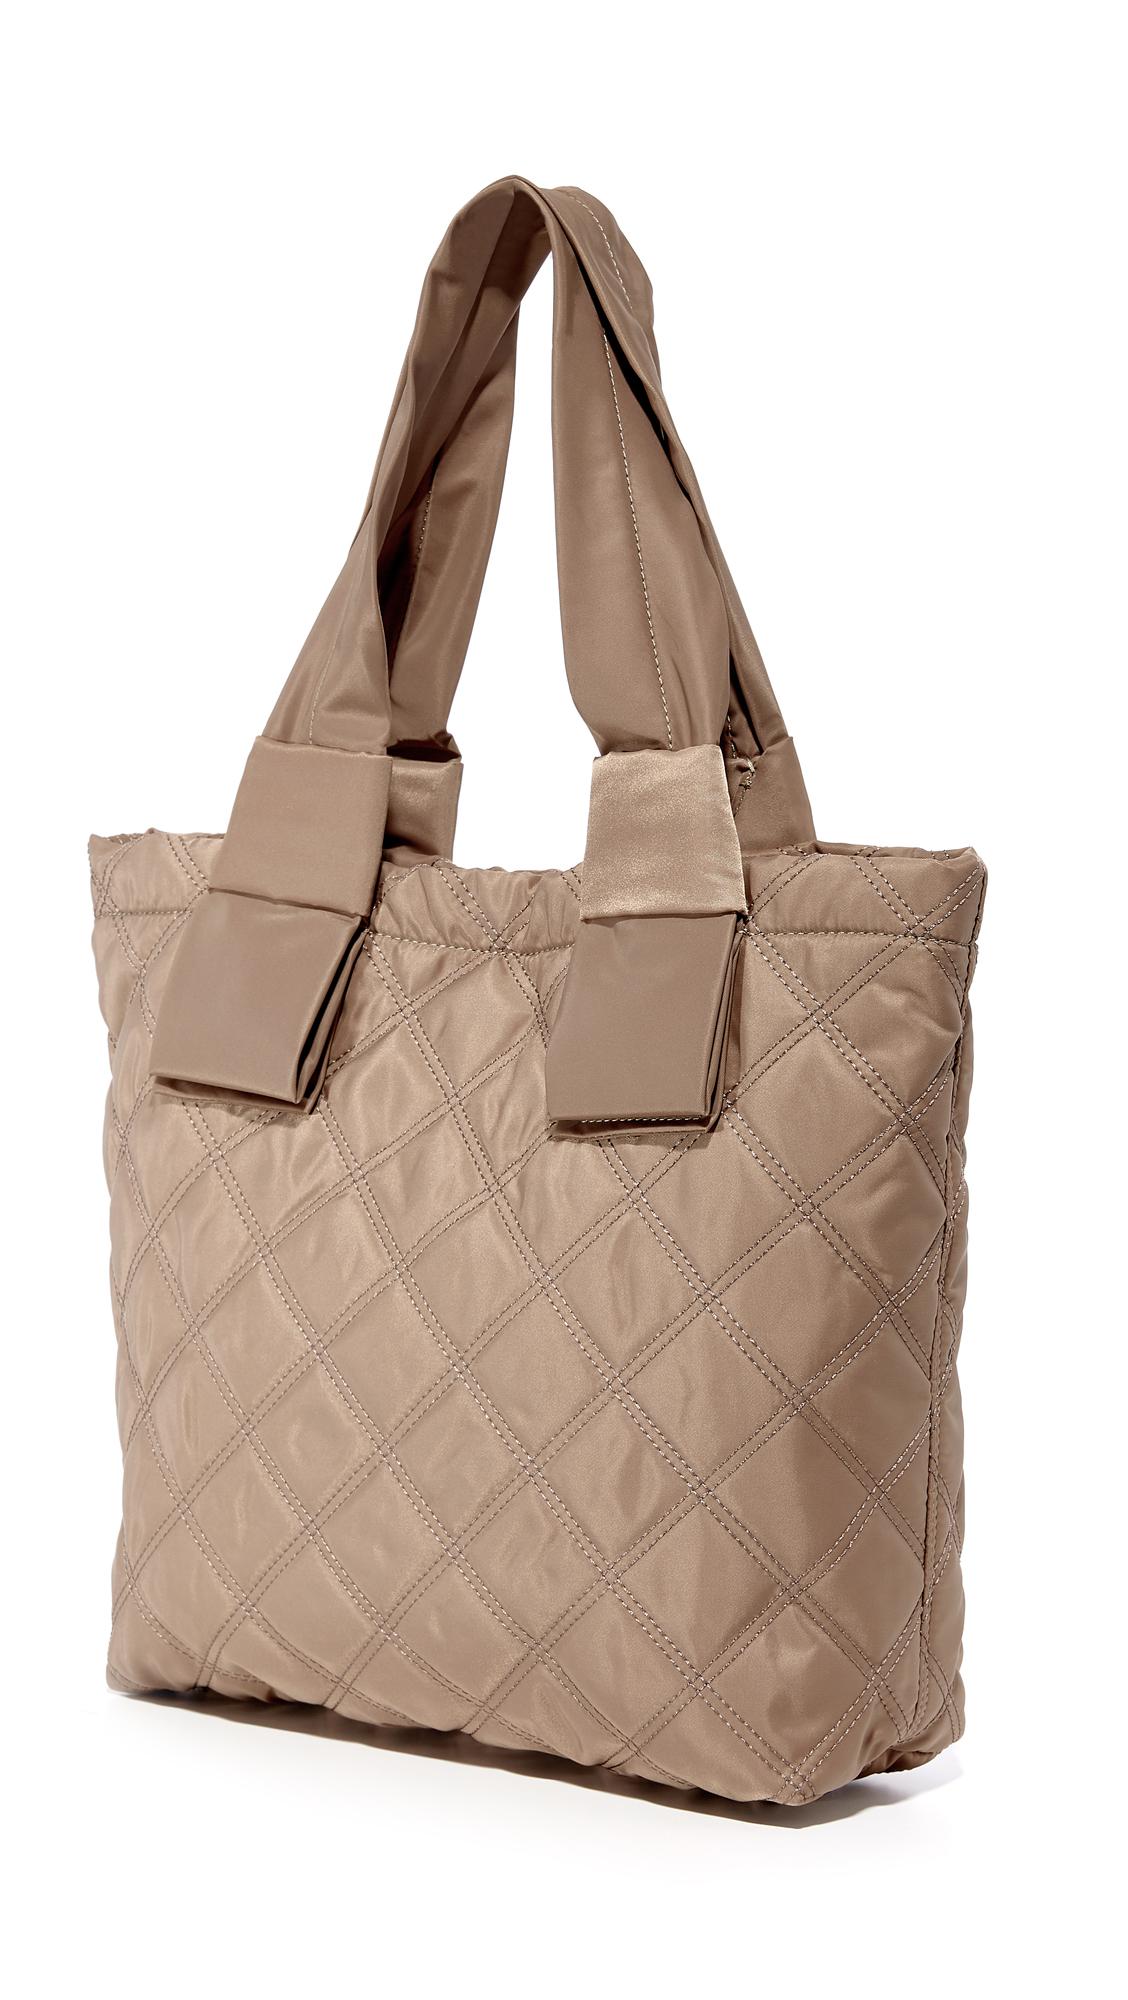 Lyst - Marc Jacobs Nylon Knot Small Tote